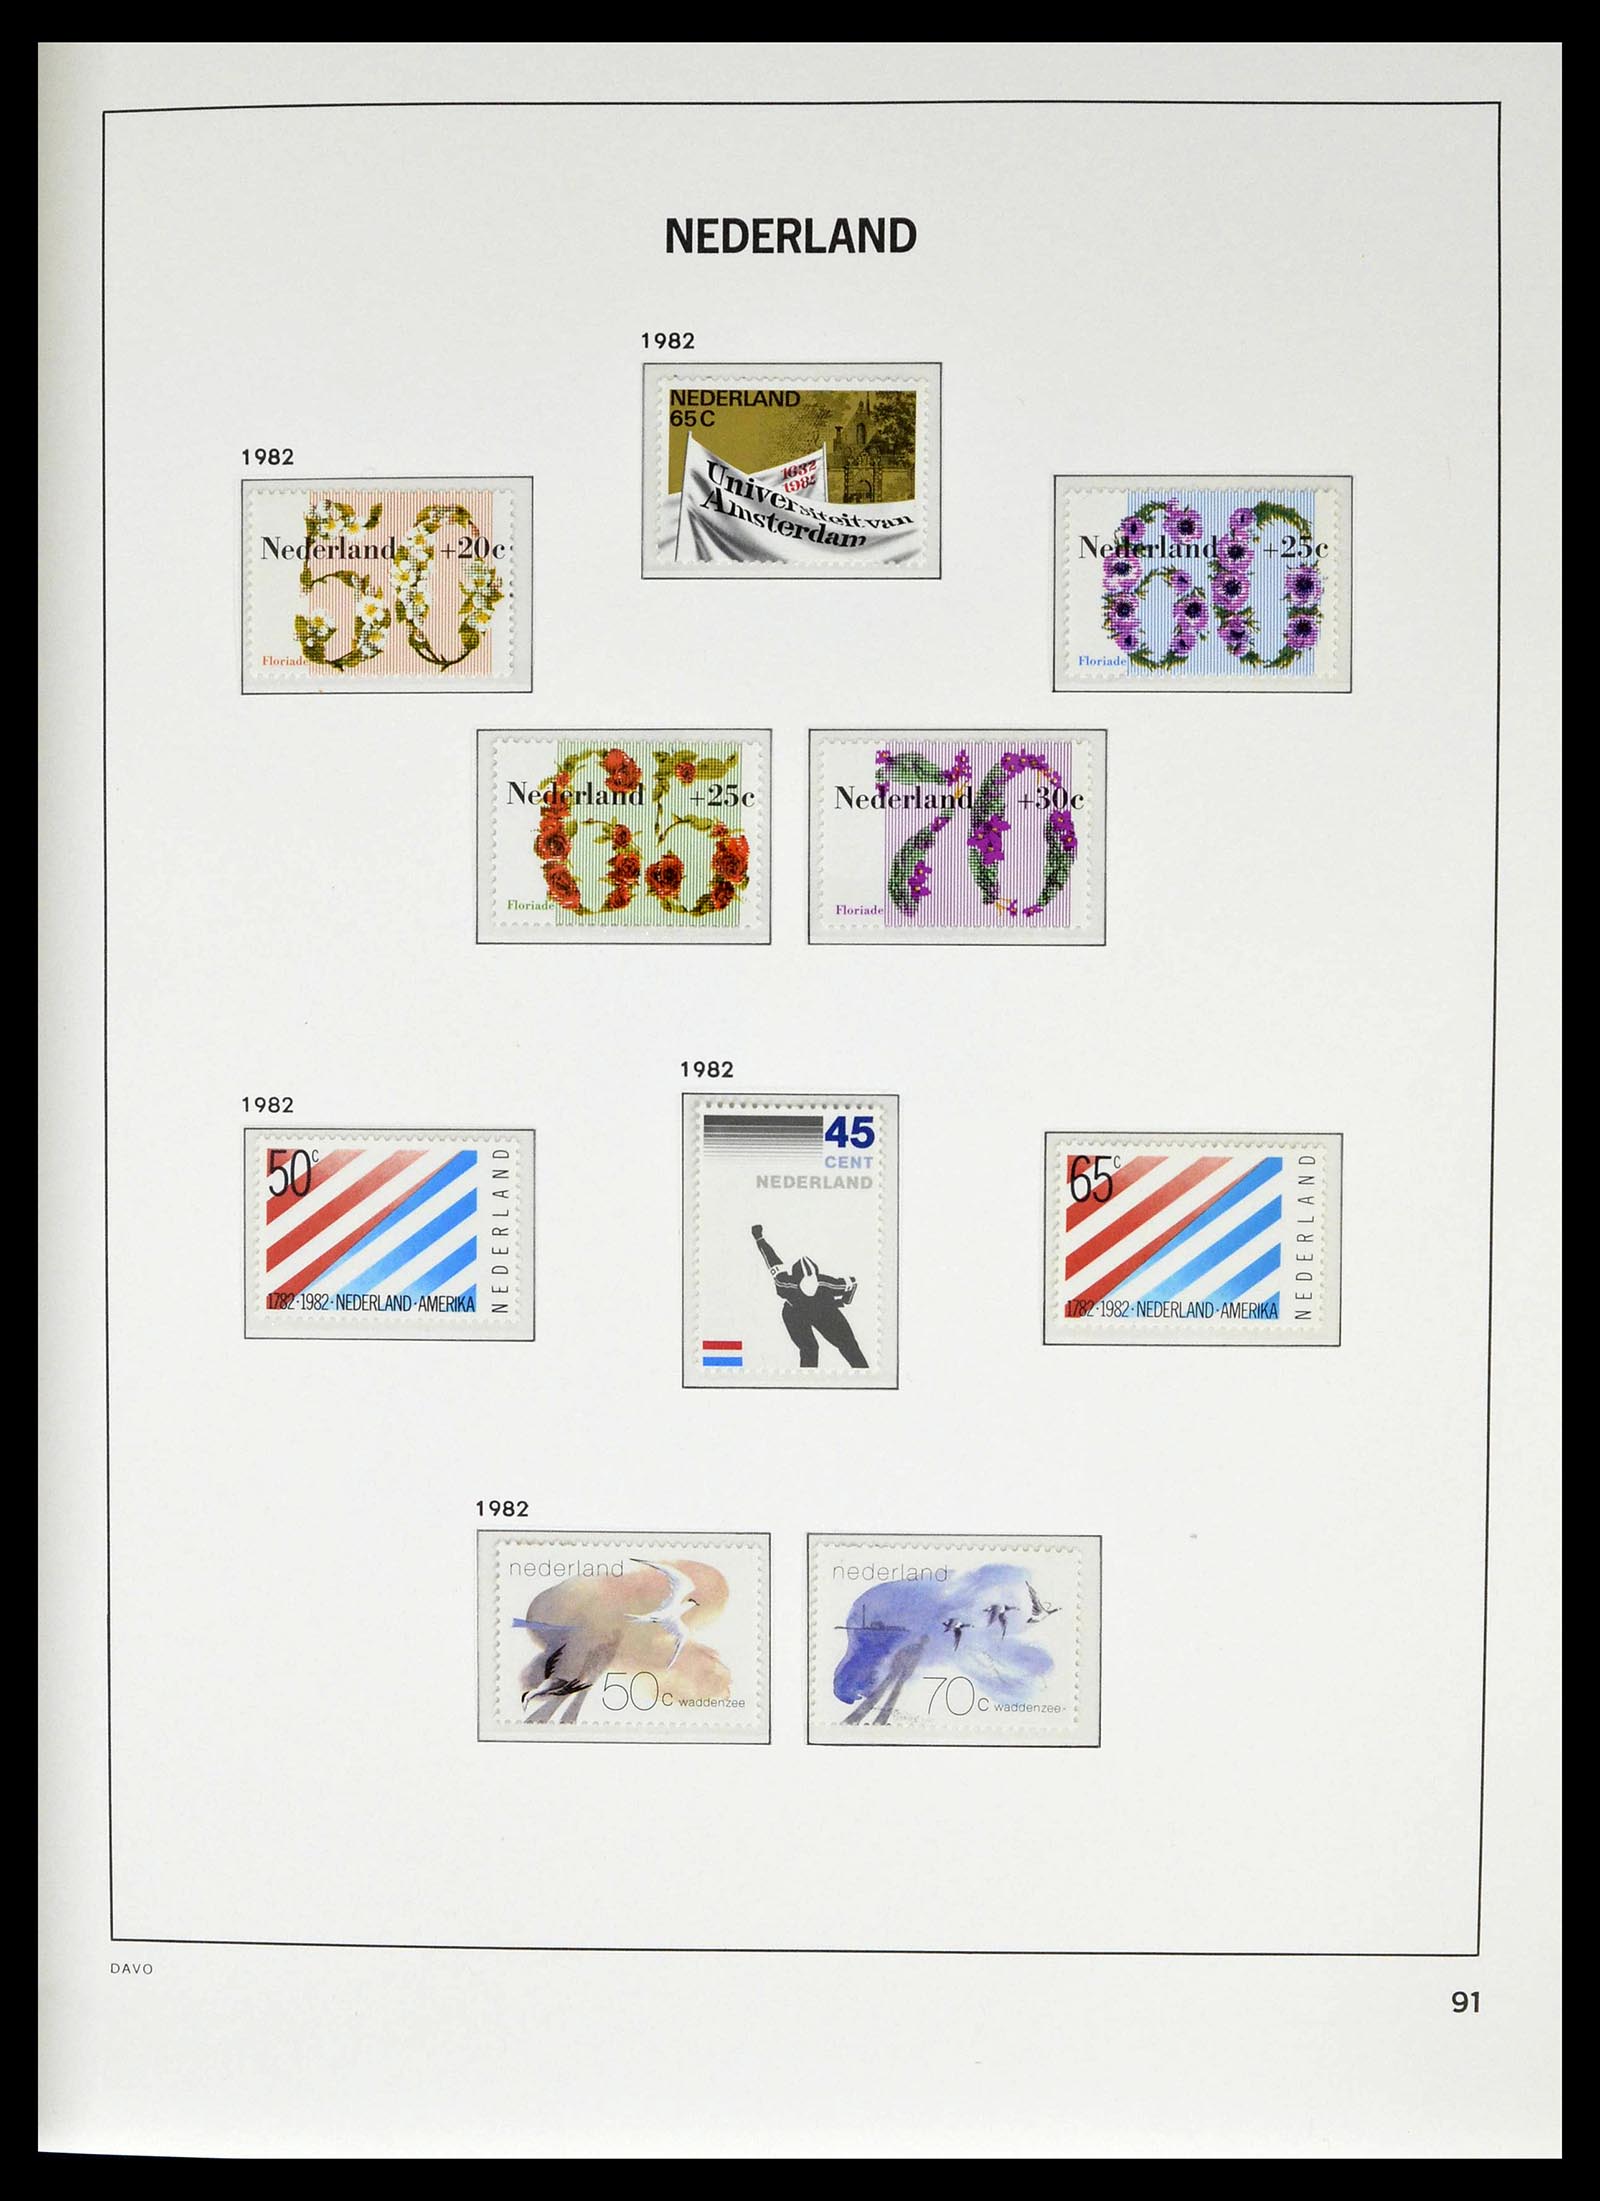 39136 0018 - Stamp collection 39136 Netherlands 1975-2020!